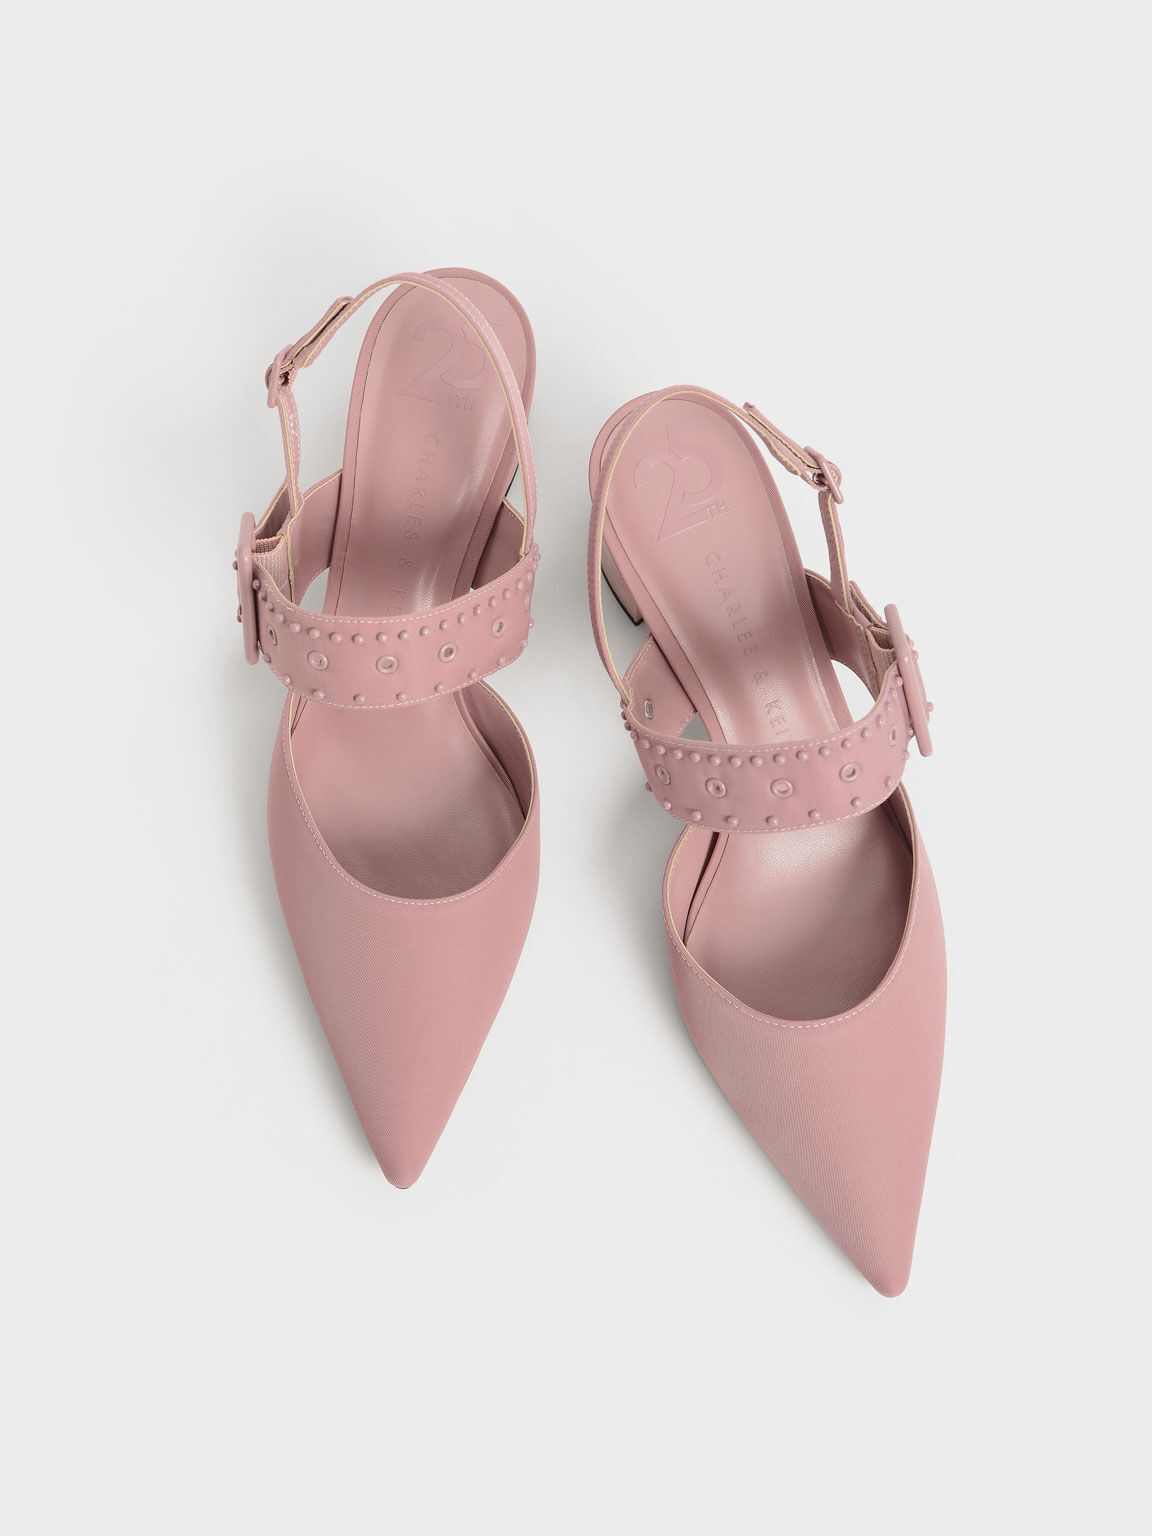 The Anniversary Series: Sepphe Recycled Nylon Grommet Slingback Pumps, Pink, hi-res